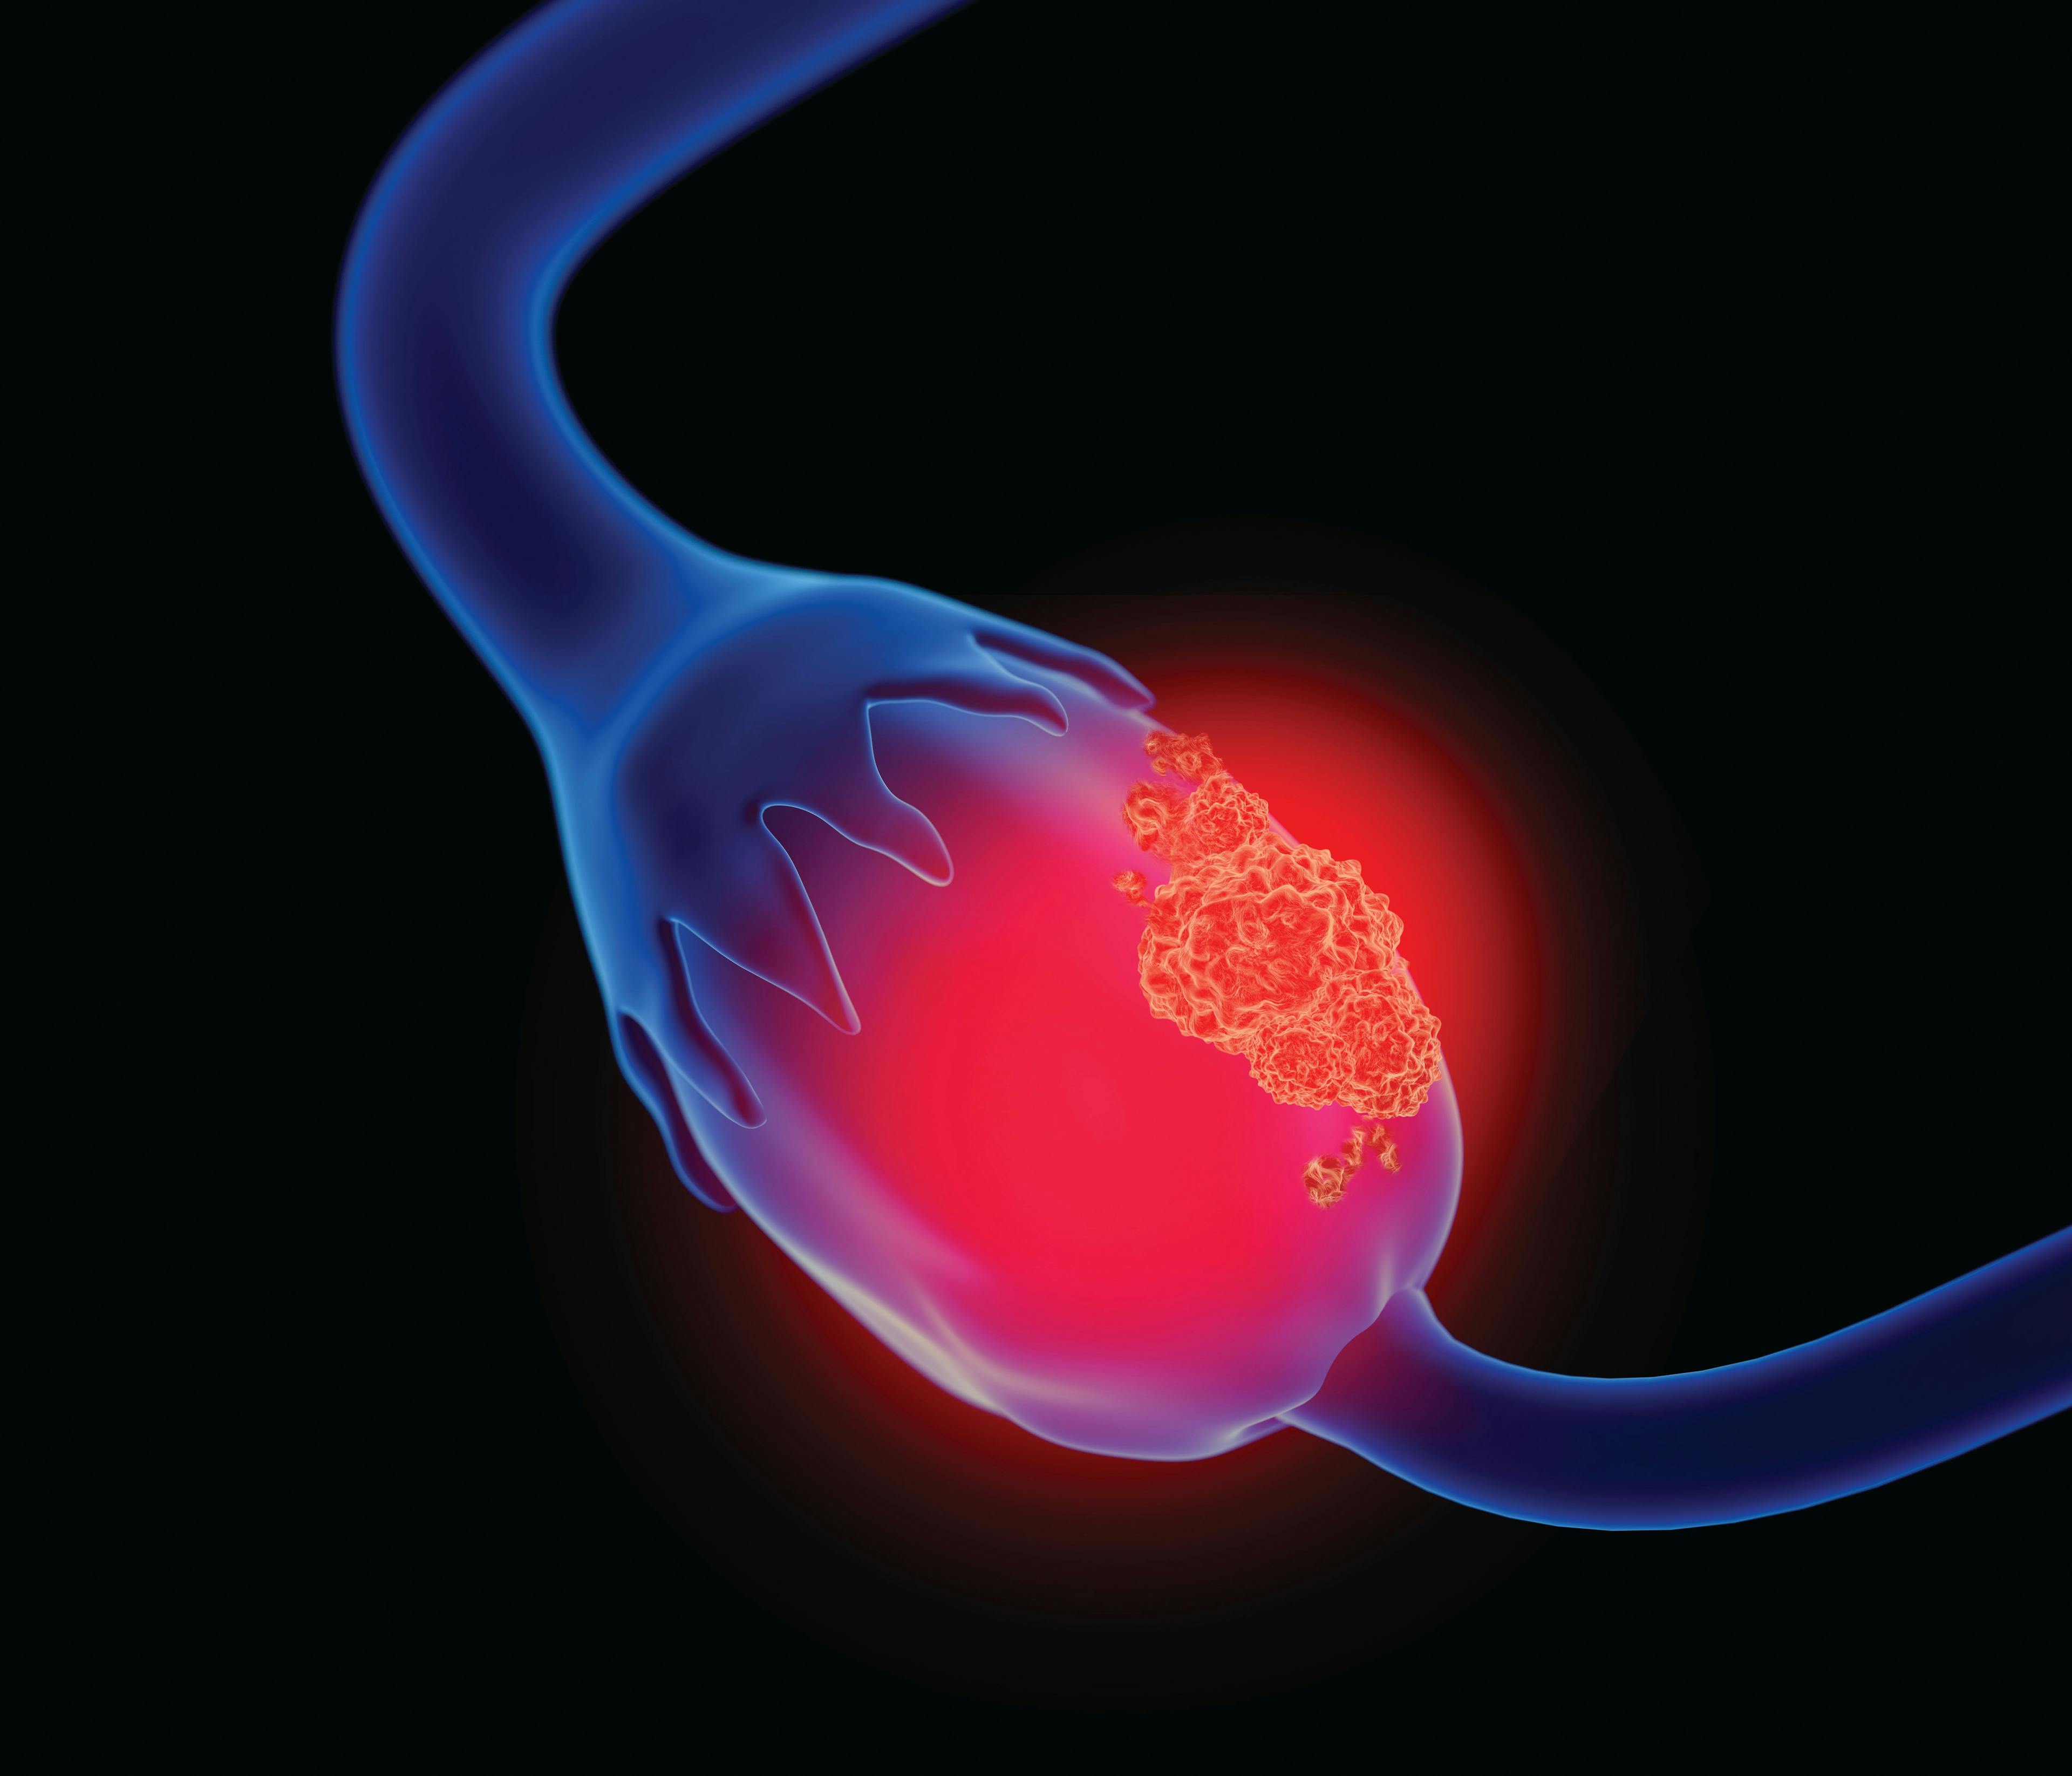 Patients with platinum-resistant ovarian cancer may benefit from treatment with ofranergene obadenovec, which received fast track designation from the FDA. 